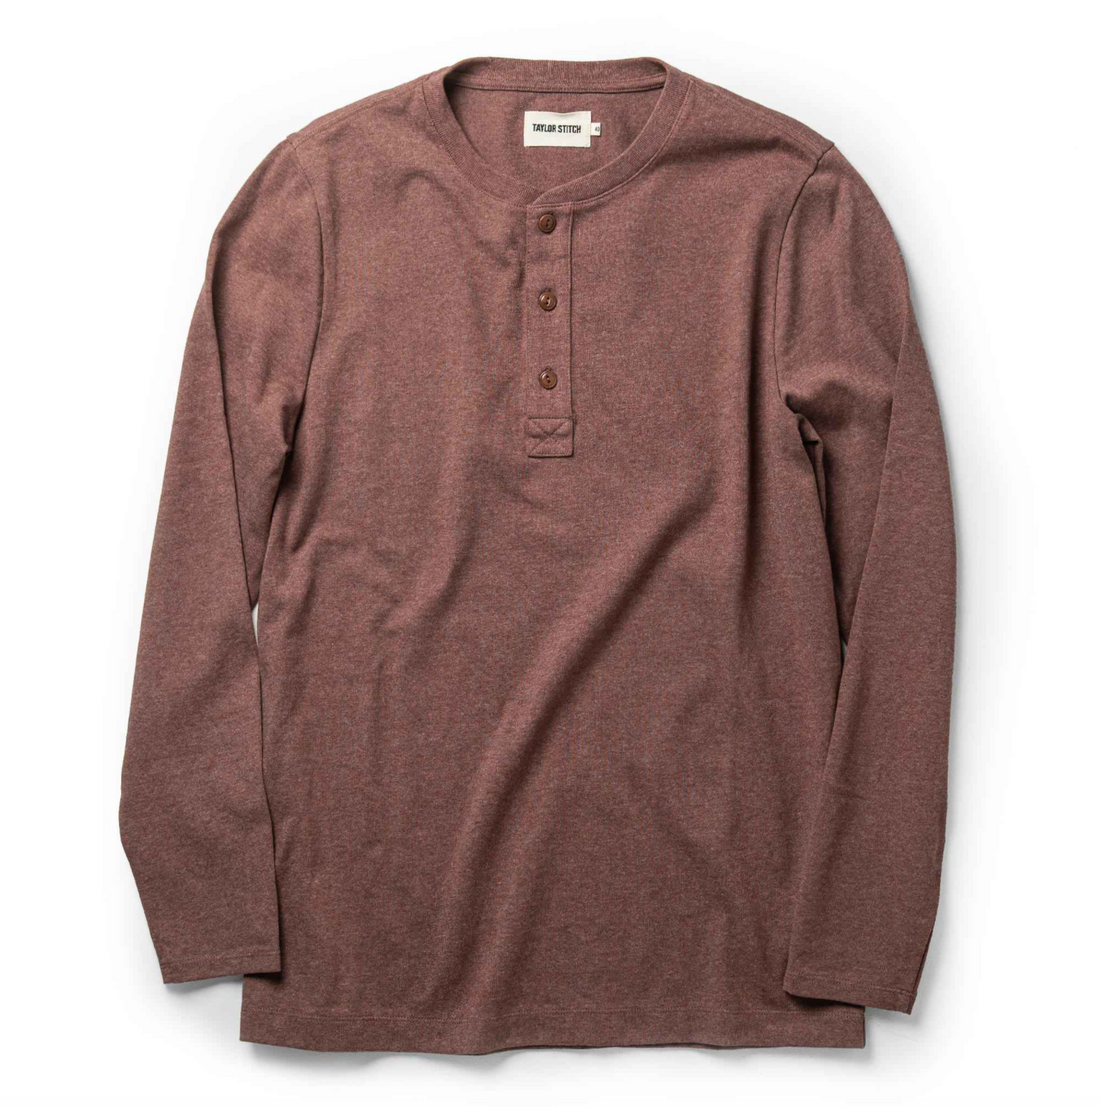 Taylor Stitch - The Heavy Bag Henley in Burgundy